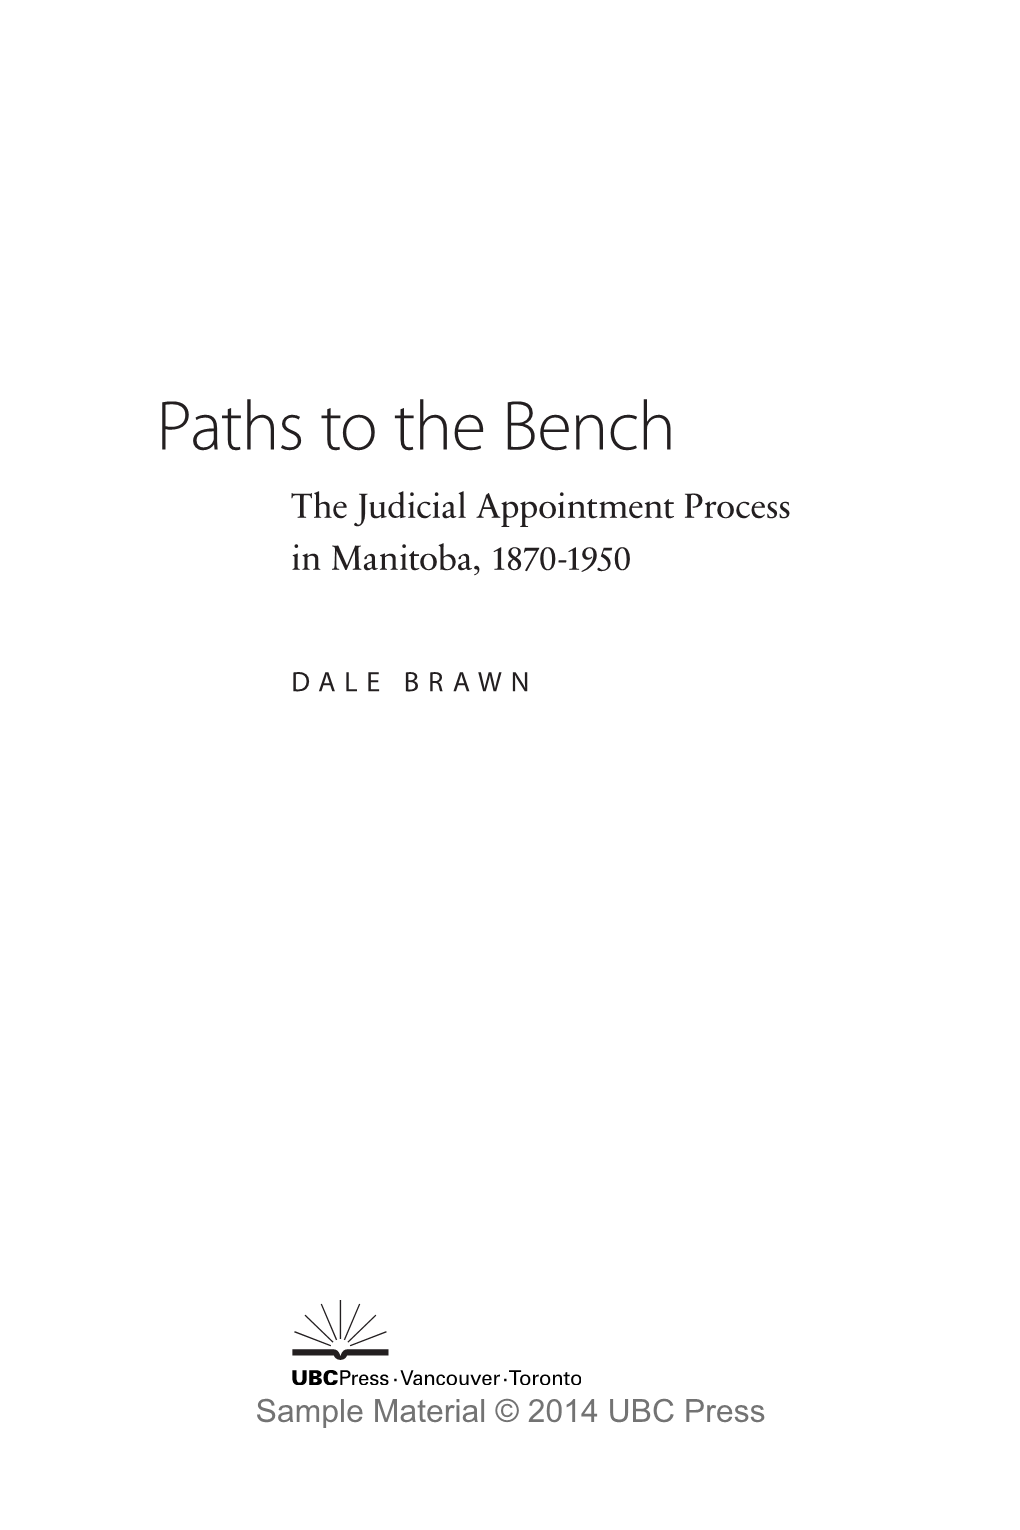 Paths to the Bench the Judicial Appointment Process in Manitoba, 1870-1950